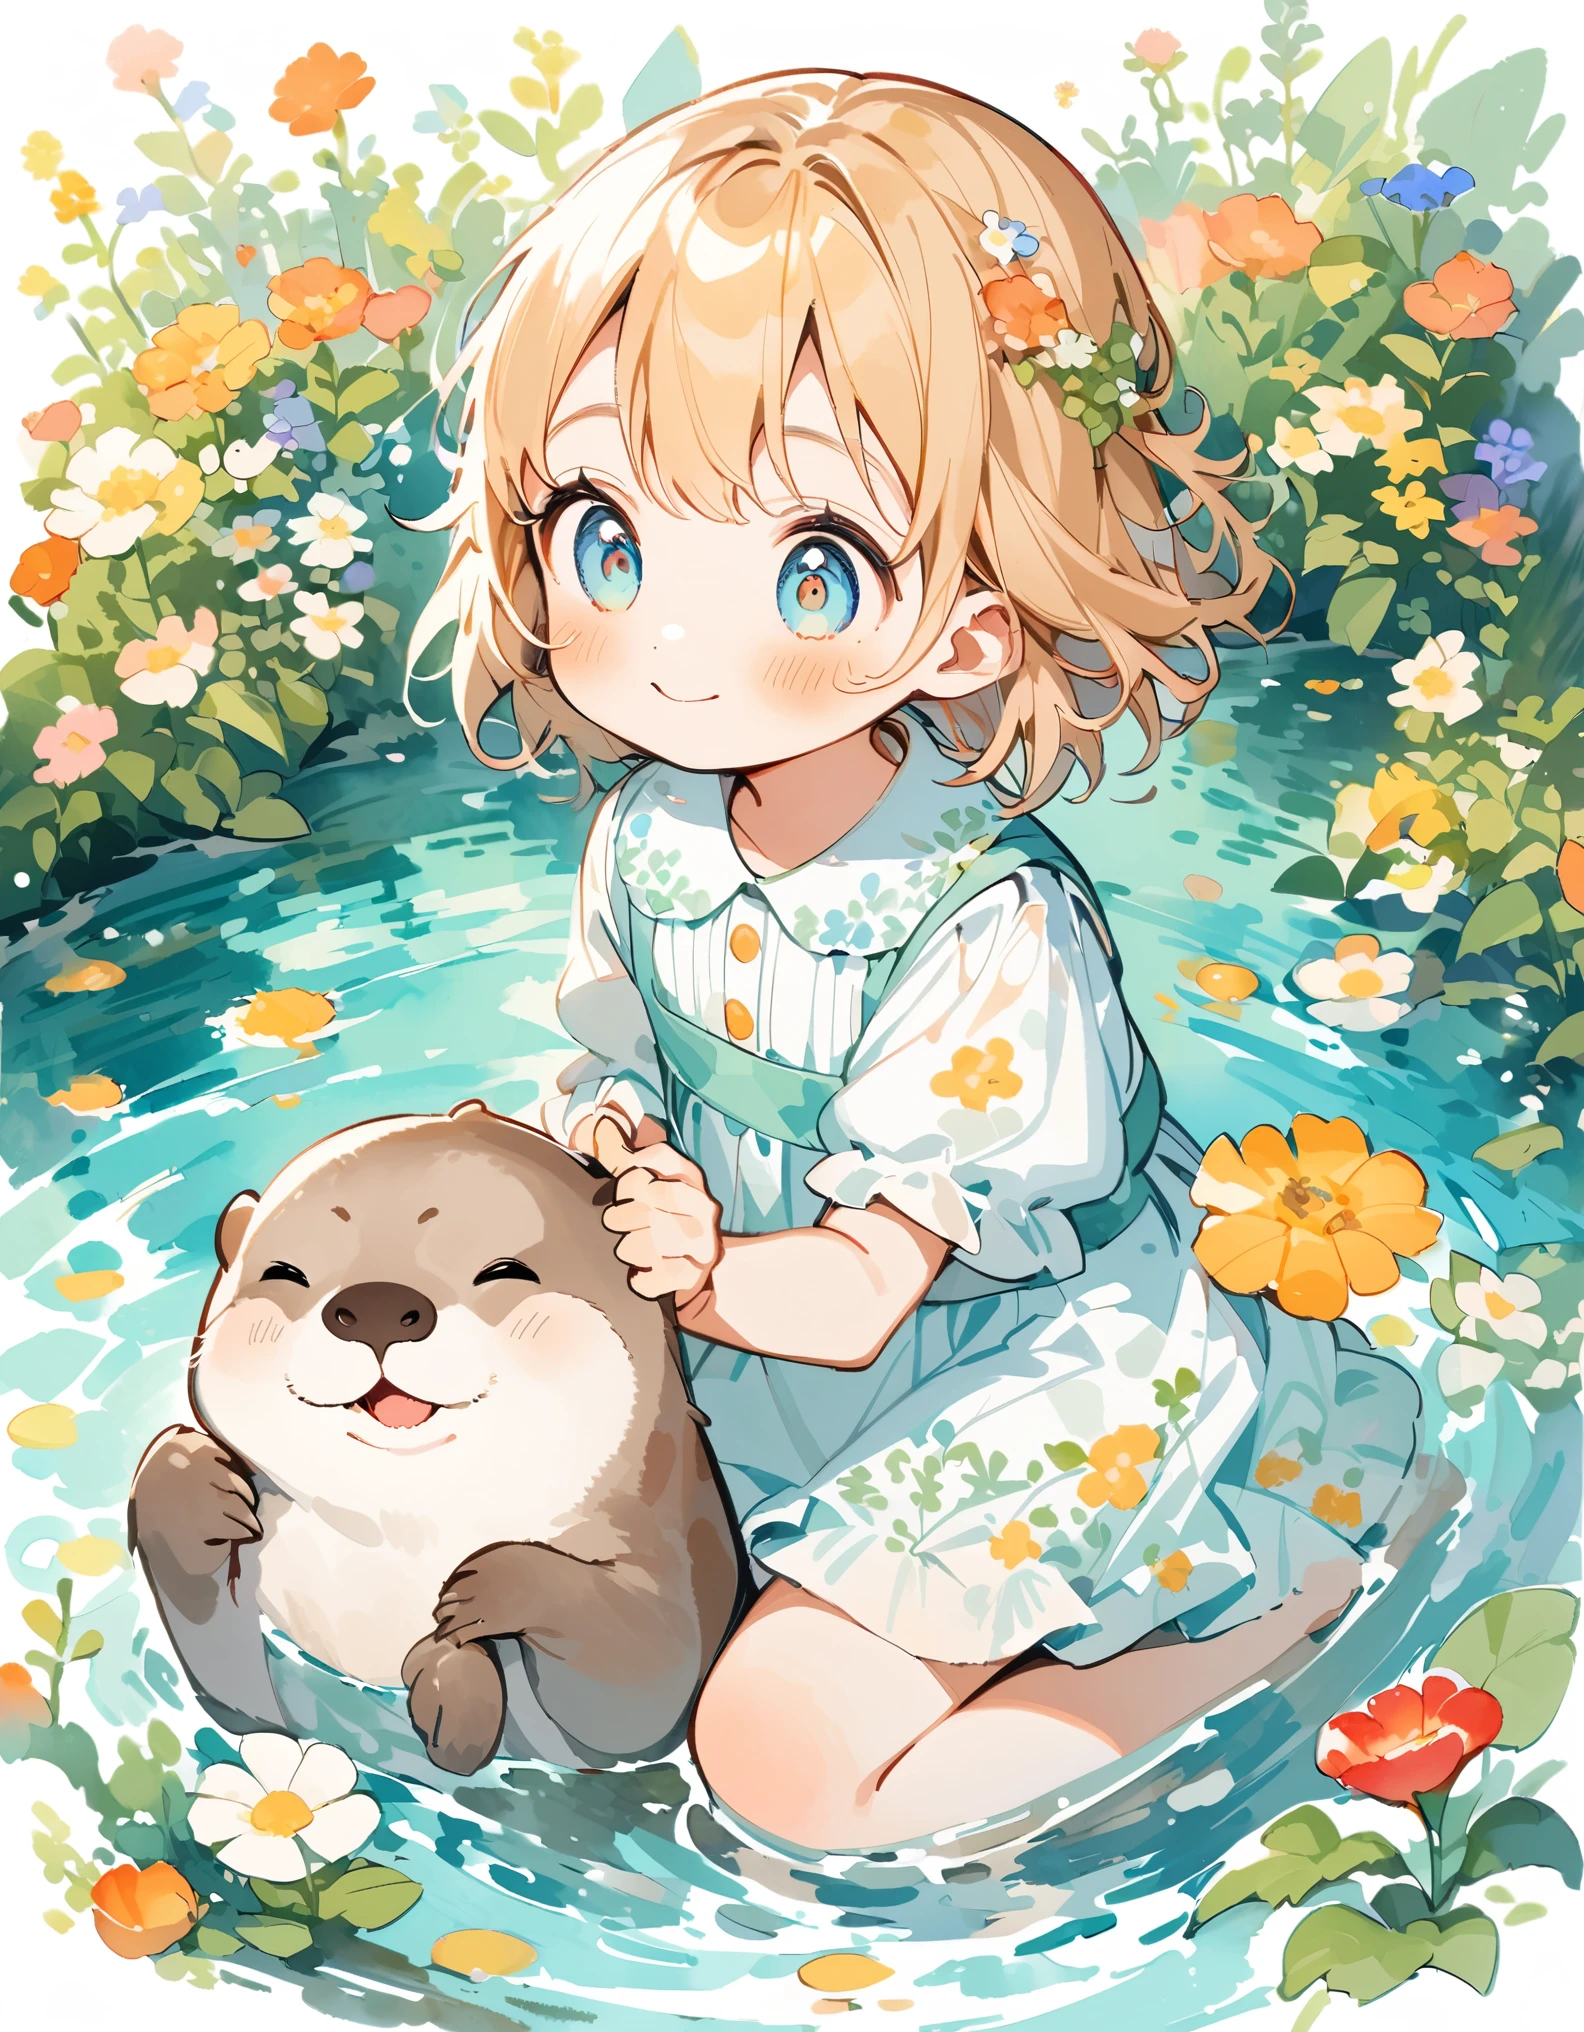 Otter, 1匹のコツメOtter,((Playing by the water)), wood々and flowers々, content:Watercolor. style:Whimsical and delicate, Like an illustration in a children&#39;s book.